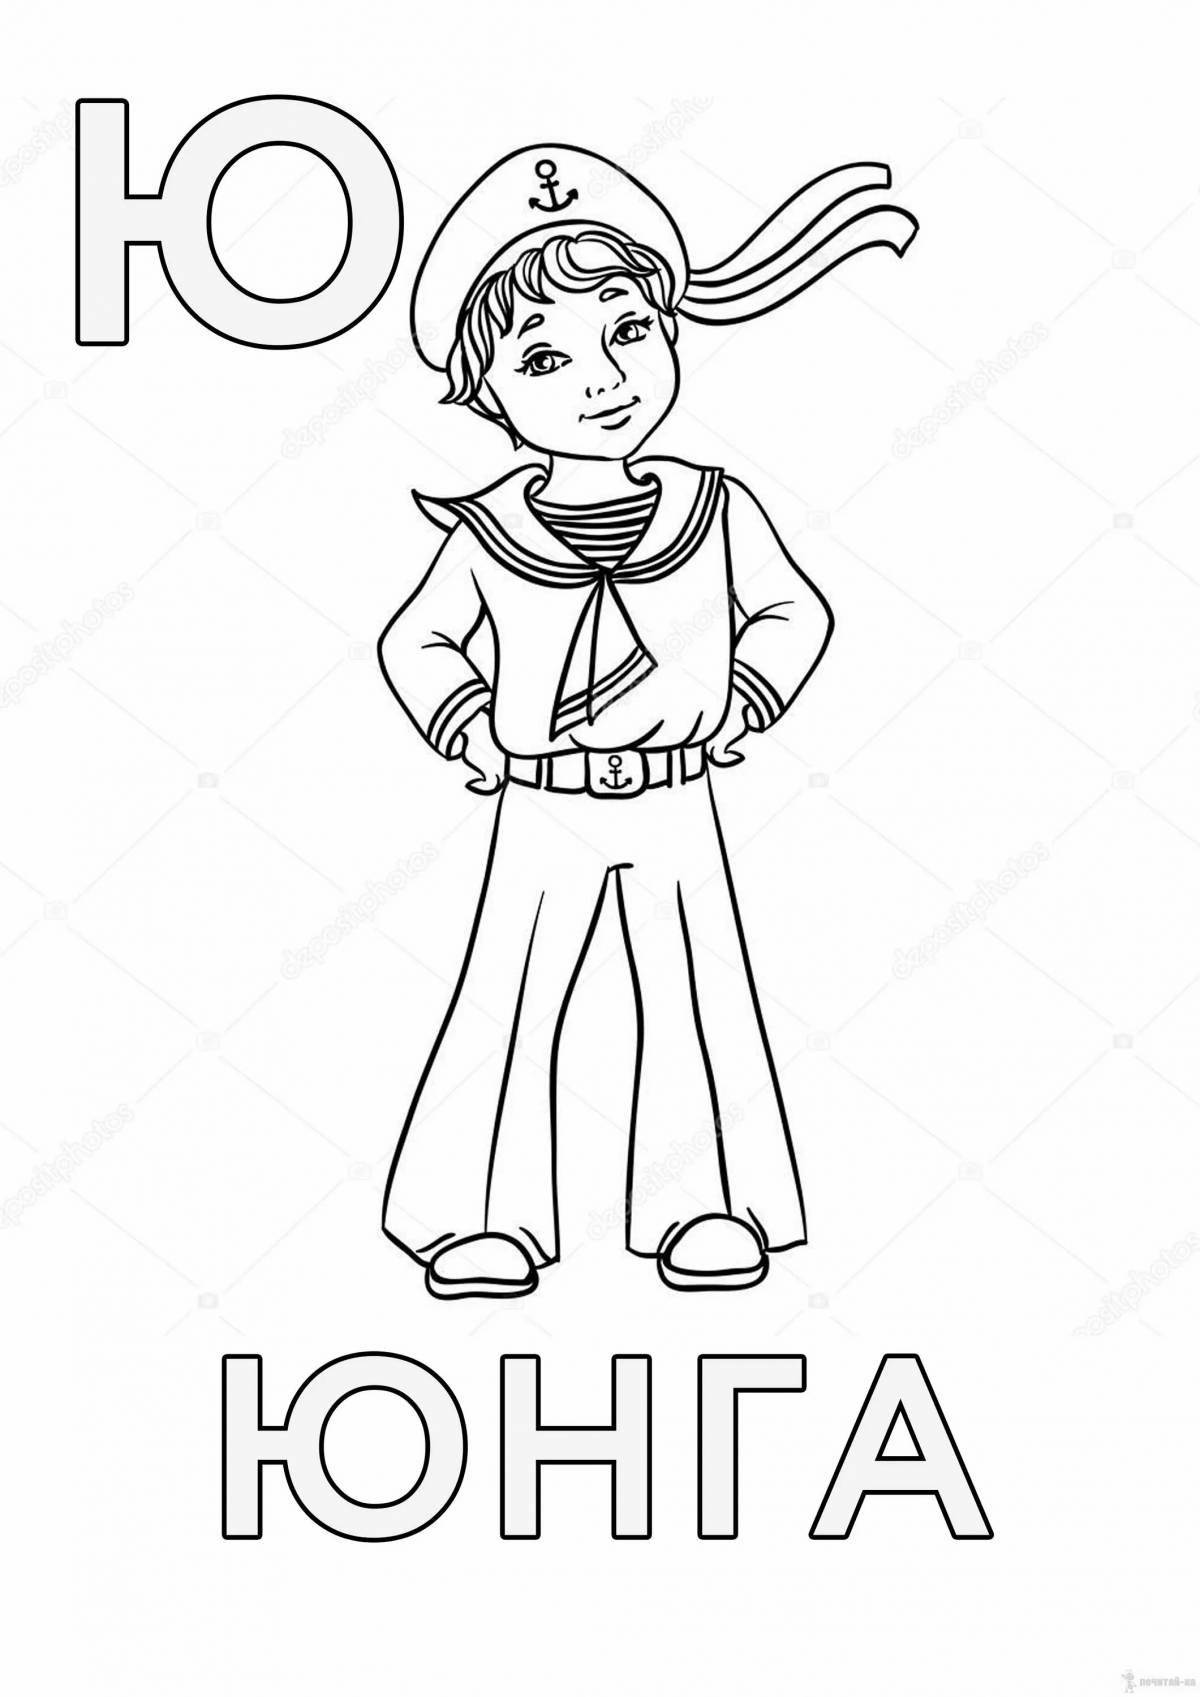 Colorful sailor's journey coloring pages for kids